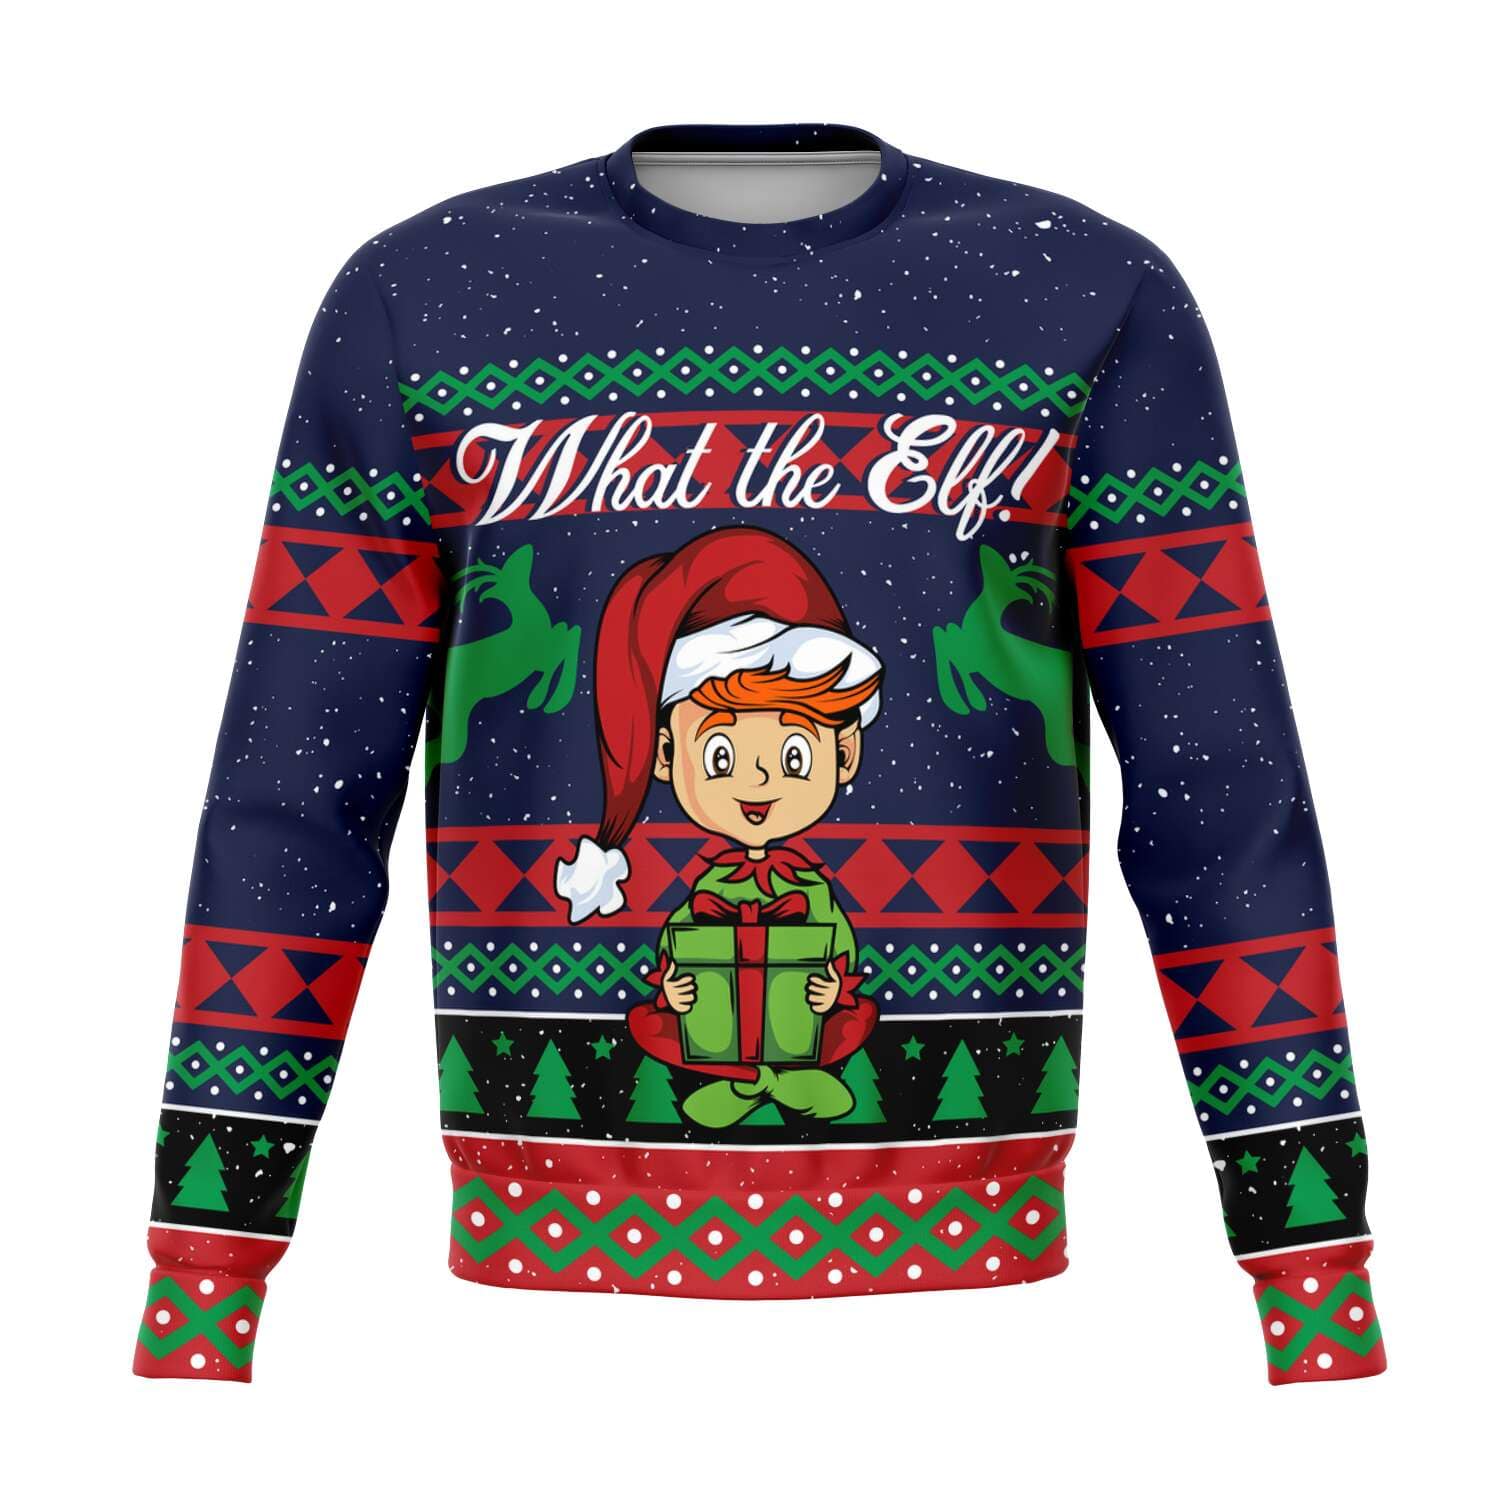 SUBLIMINATOR What the Elf Ugly Christmas Sweater Sweatshirt XS SBSWF_D-0905-XS